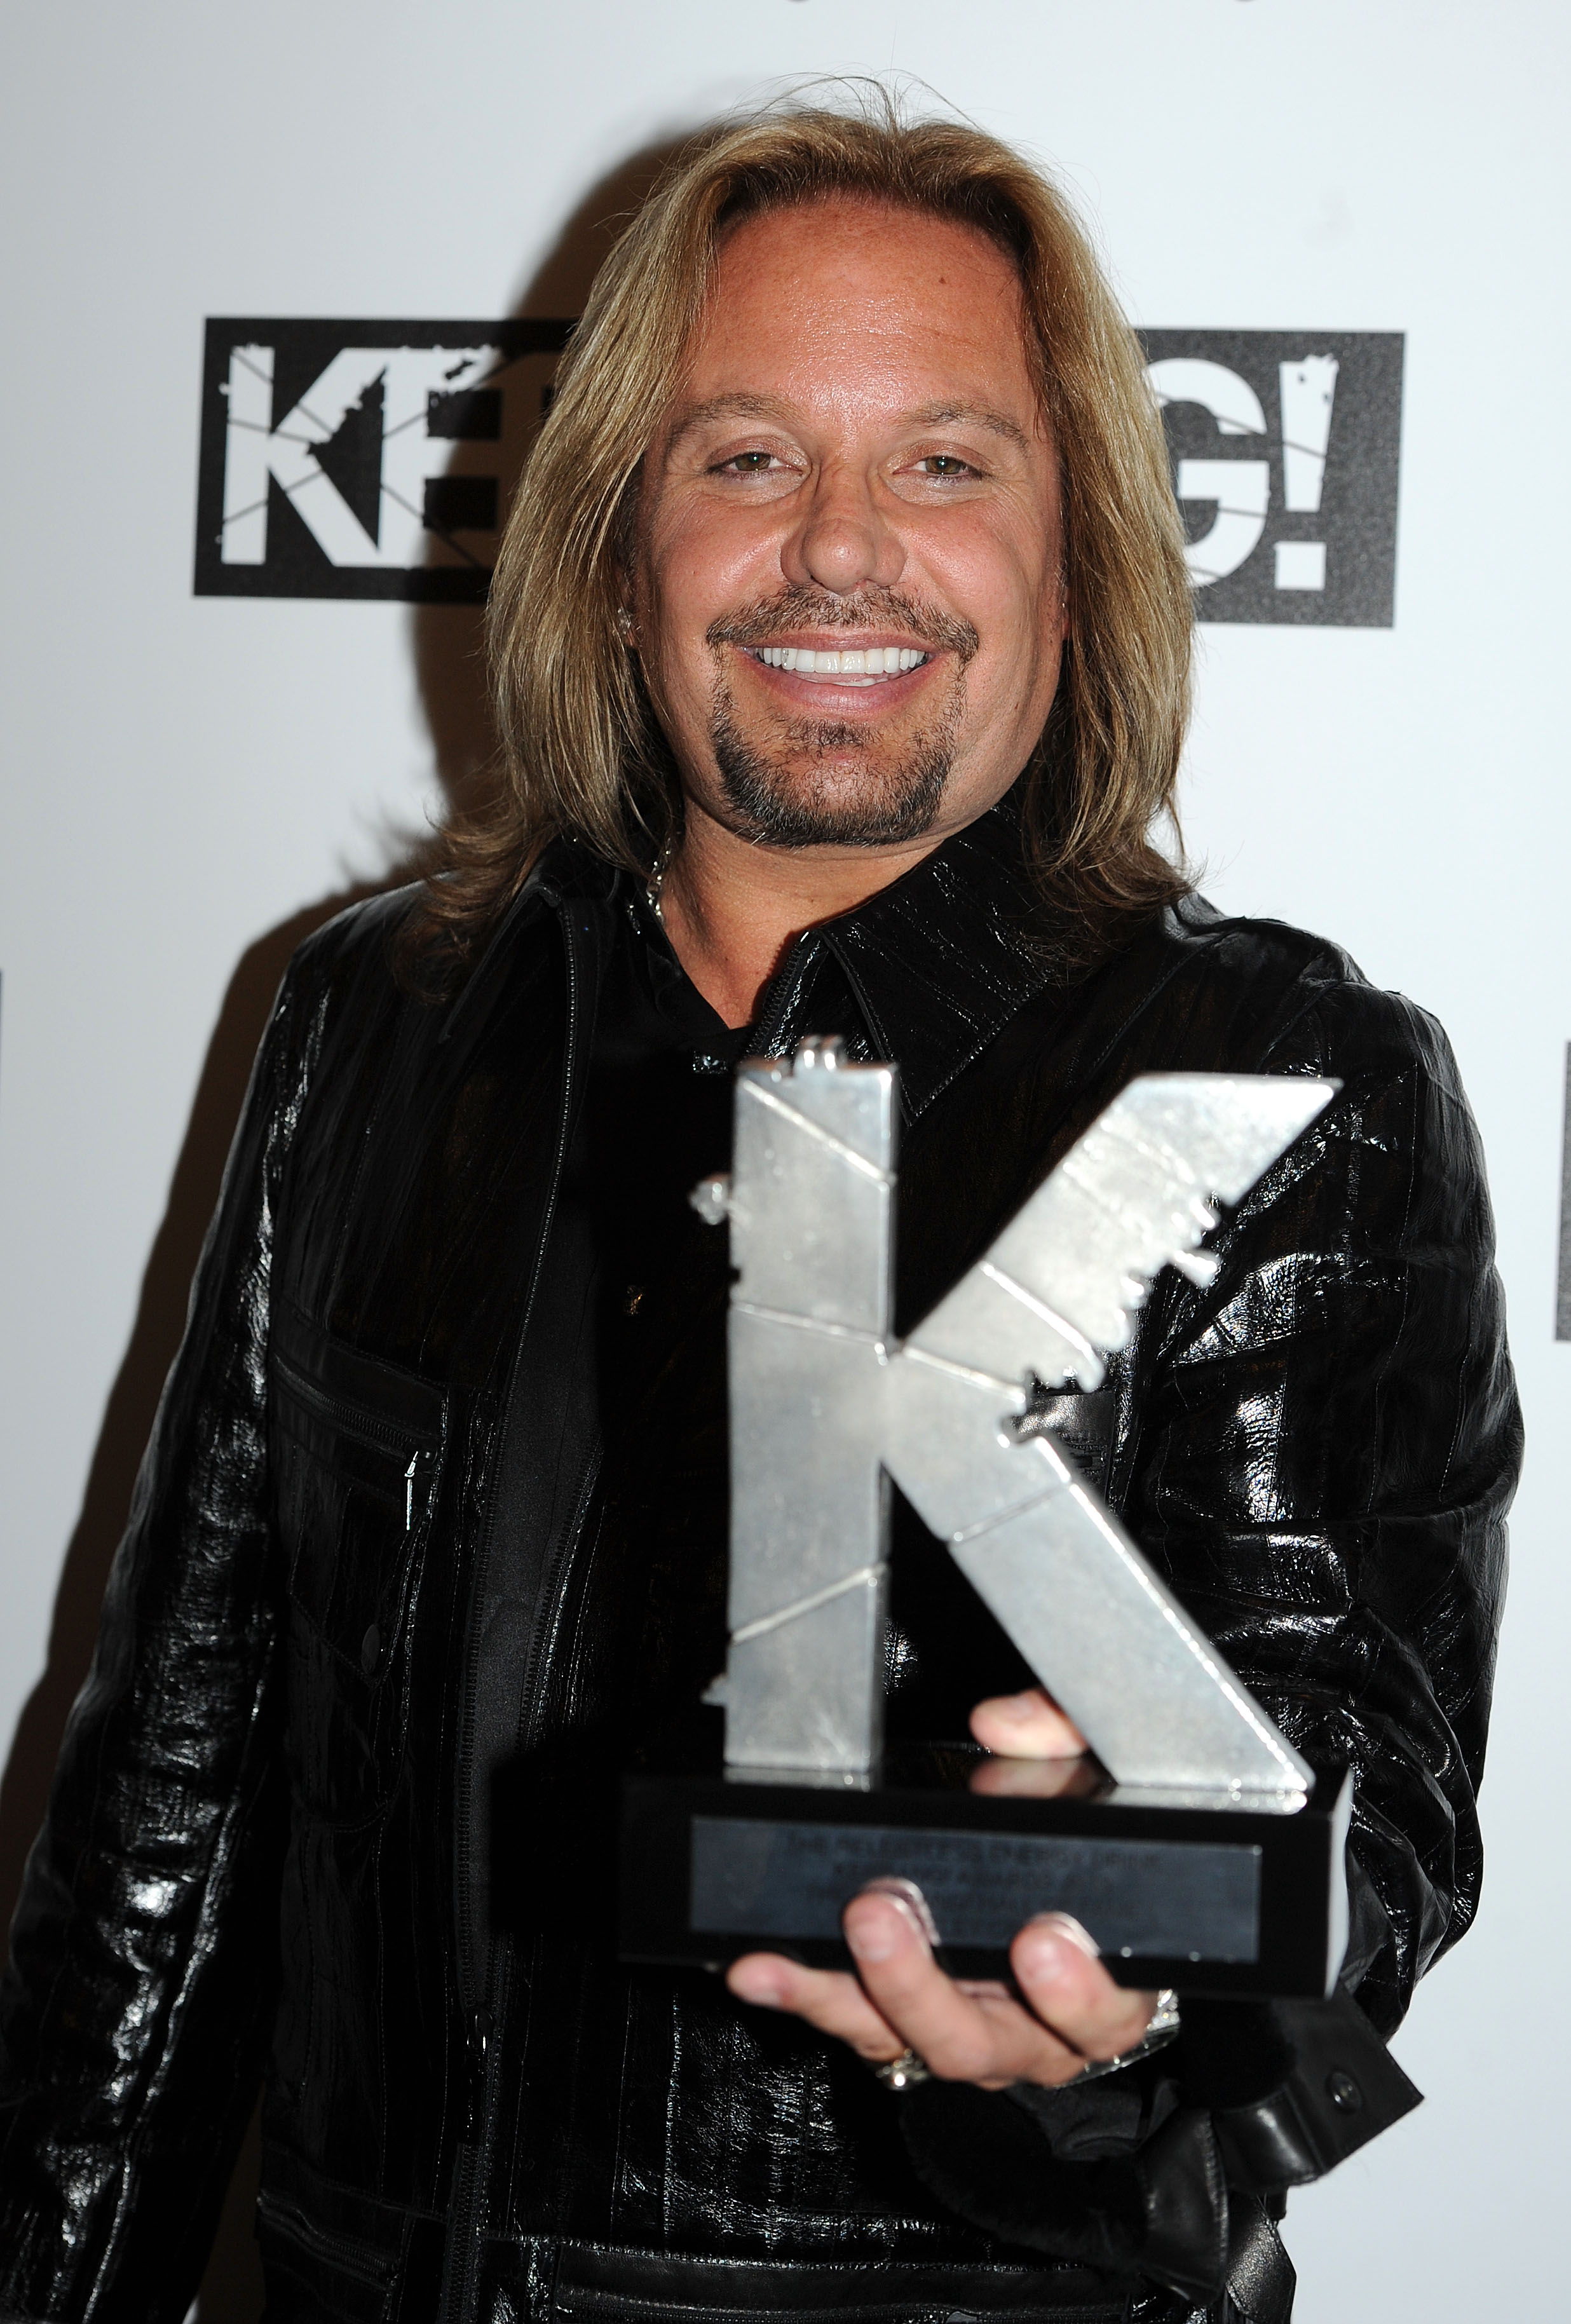 Vince Neil at the Kerrang! Awards in London, Britain on July 29, 2010 | Source: Getty Images